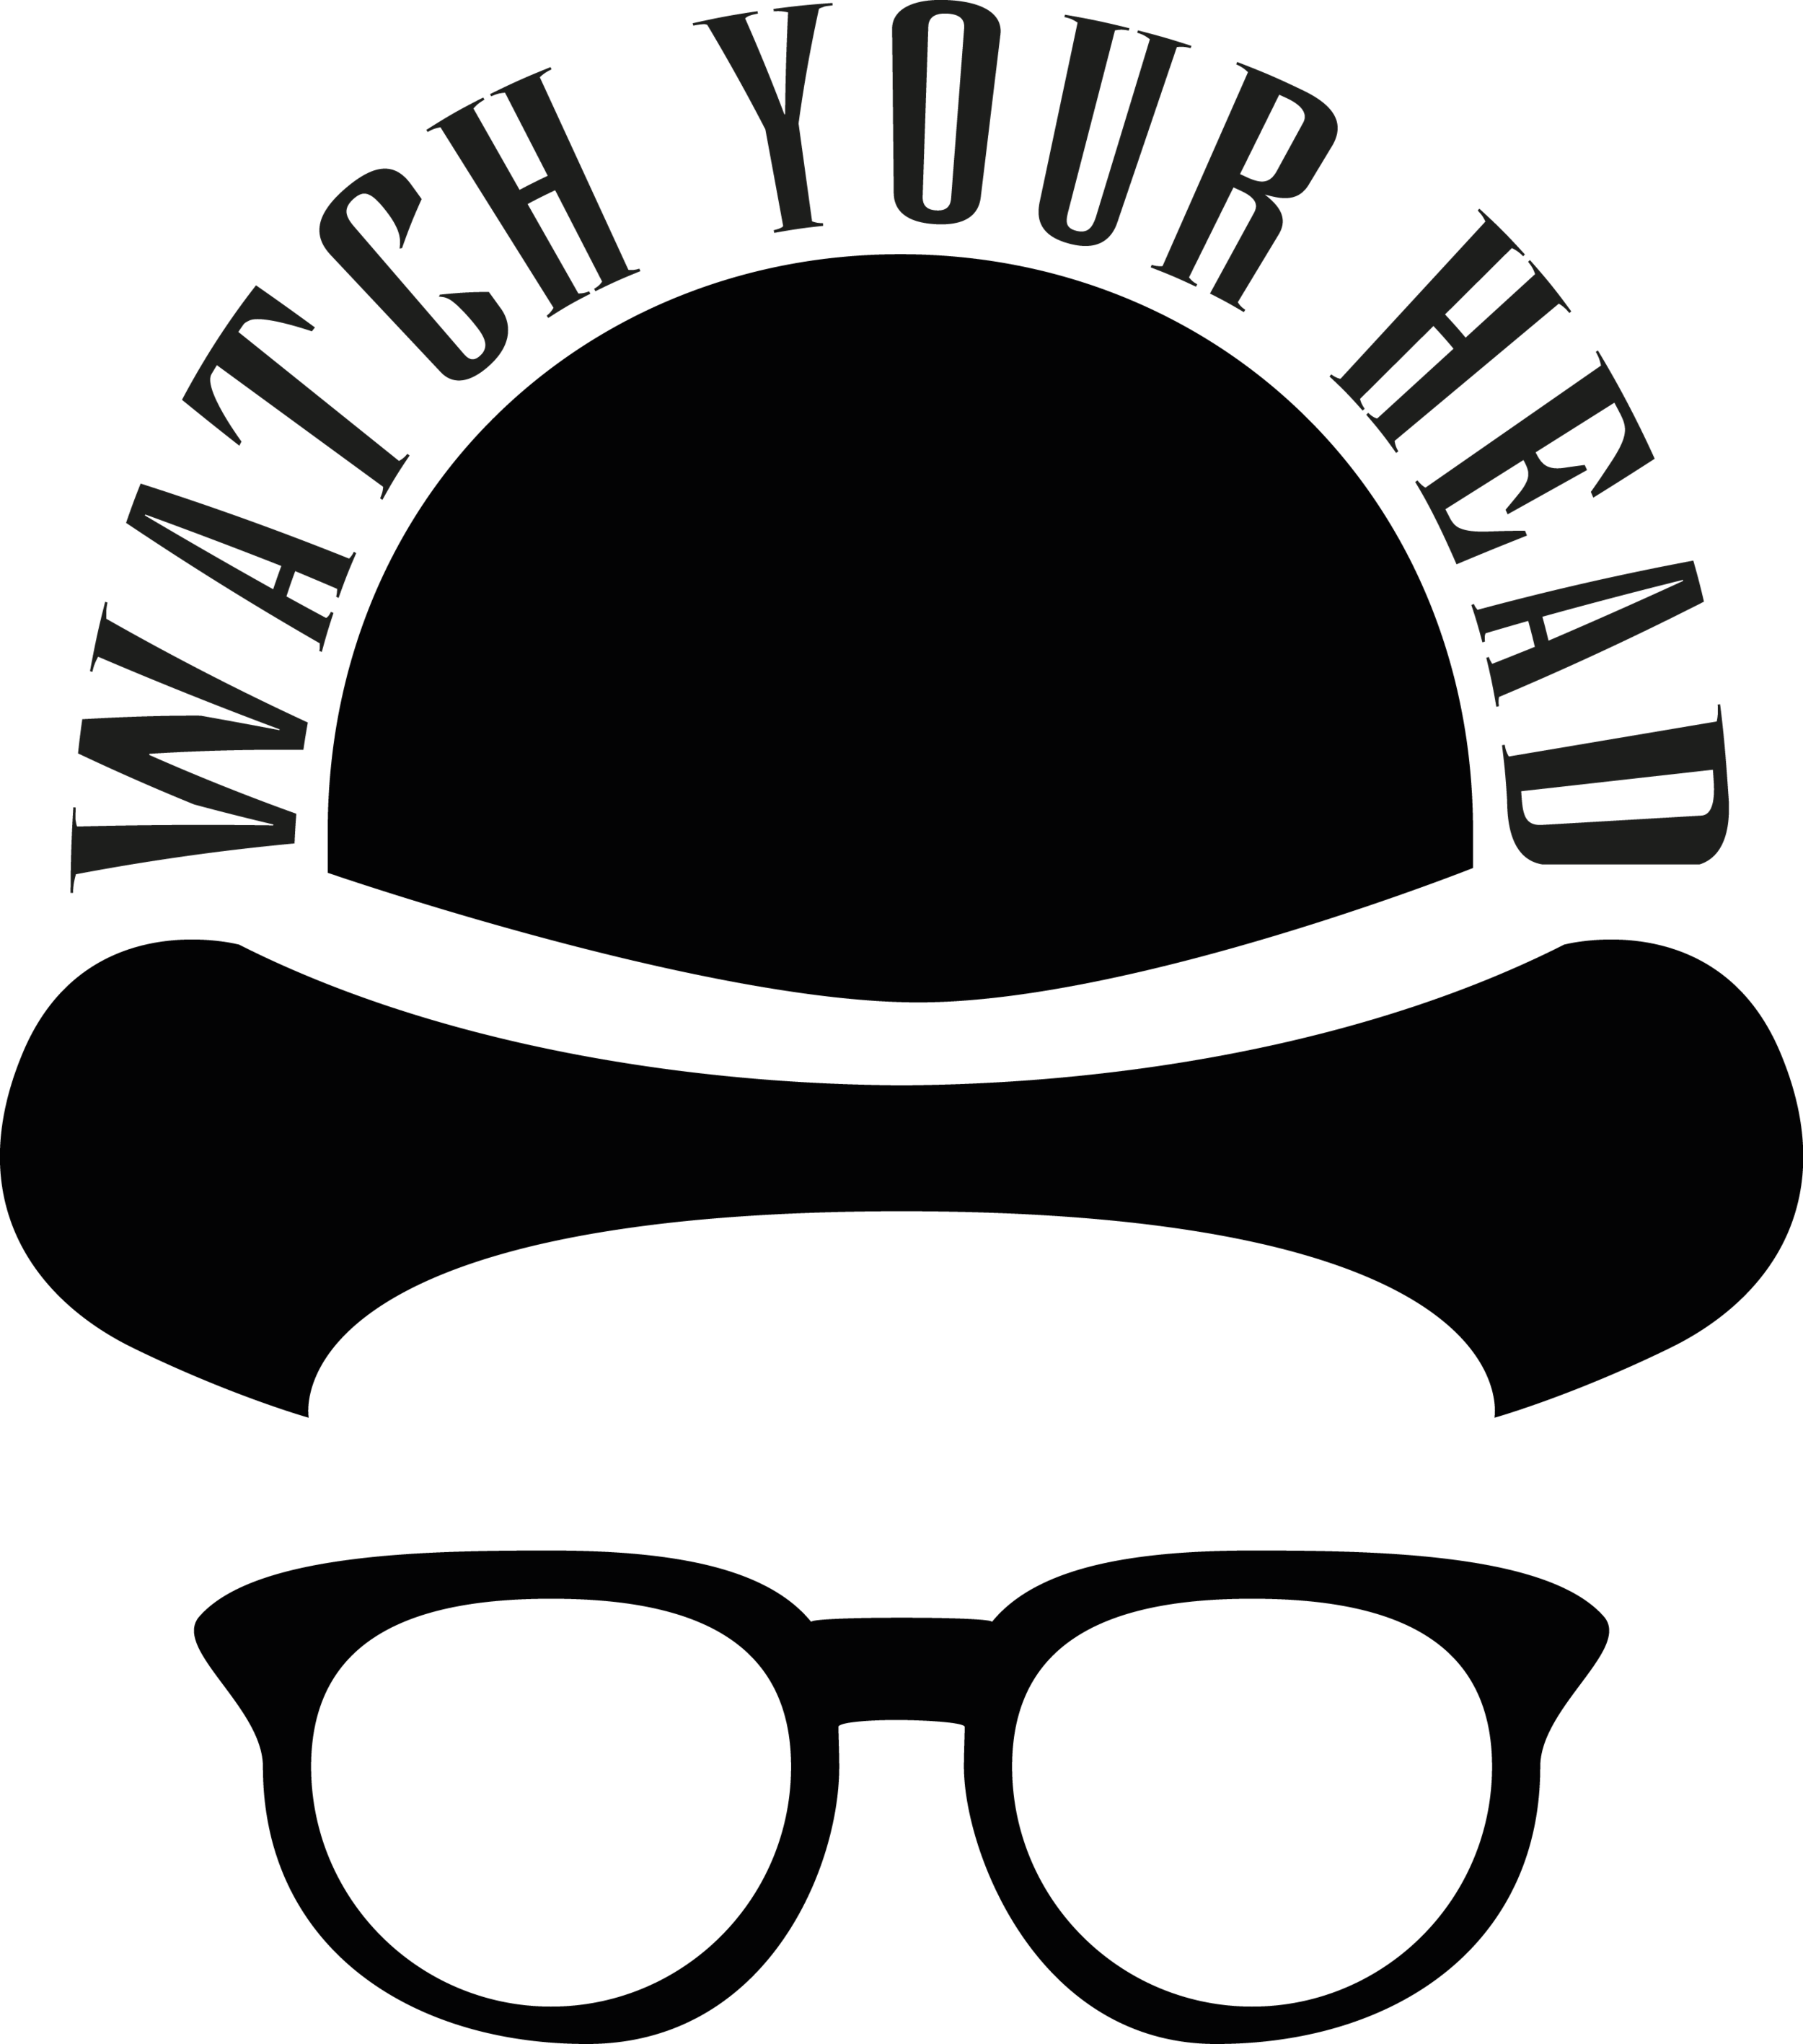 Watch Your Head